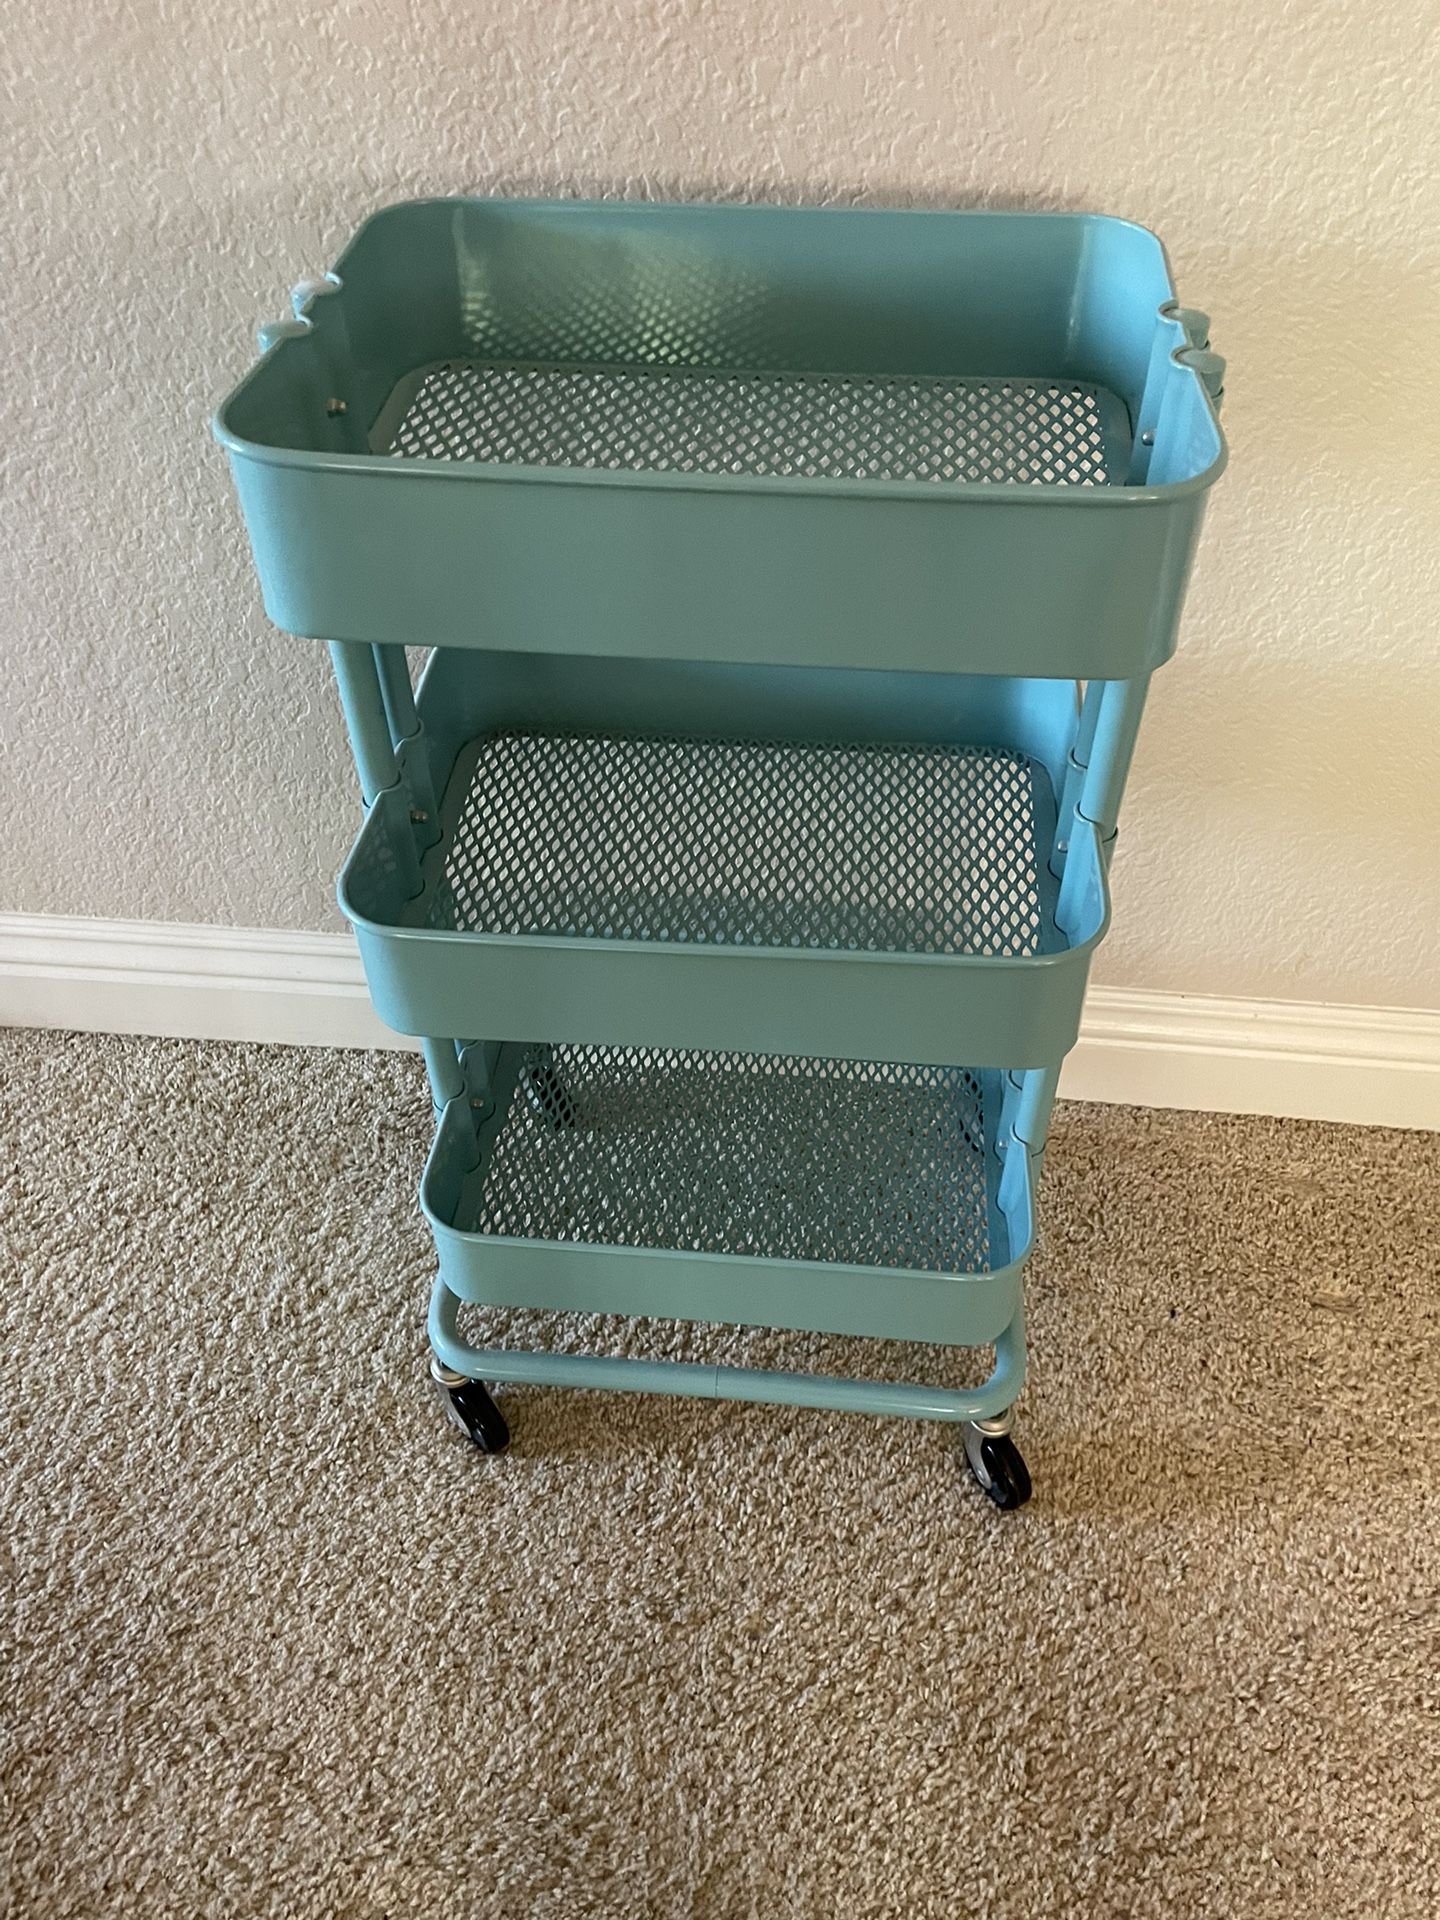 Cart - 3 Tier Metal Cart With Wheels (Great For  Kitchen, Bathroom, Office, Nursery, Crafts)